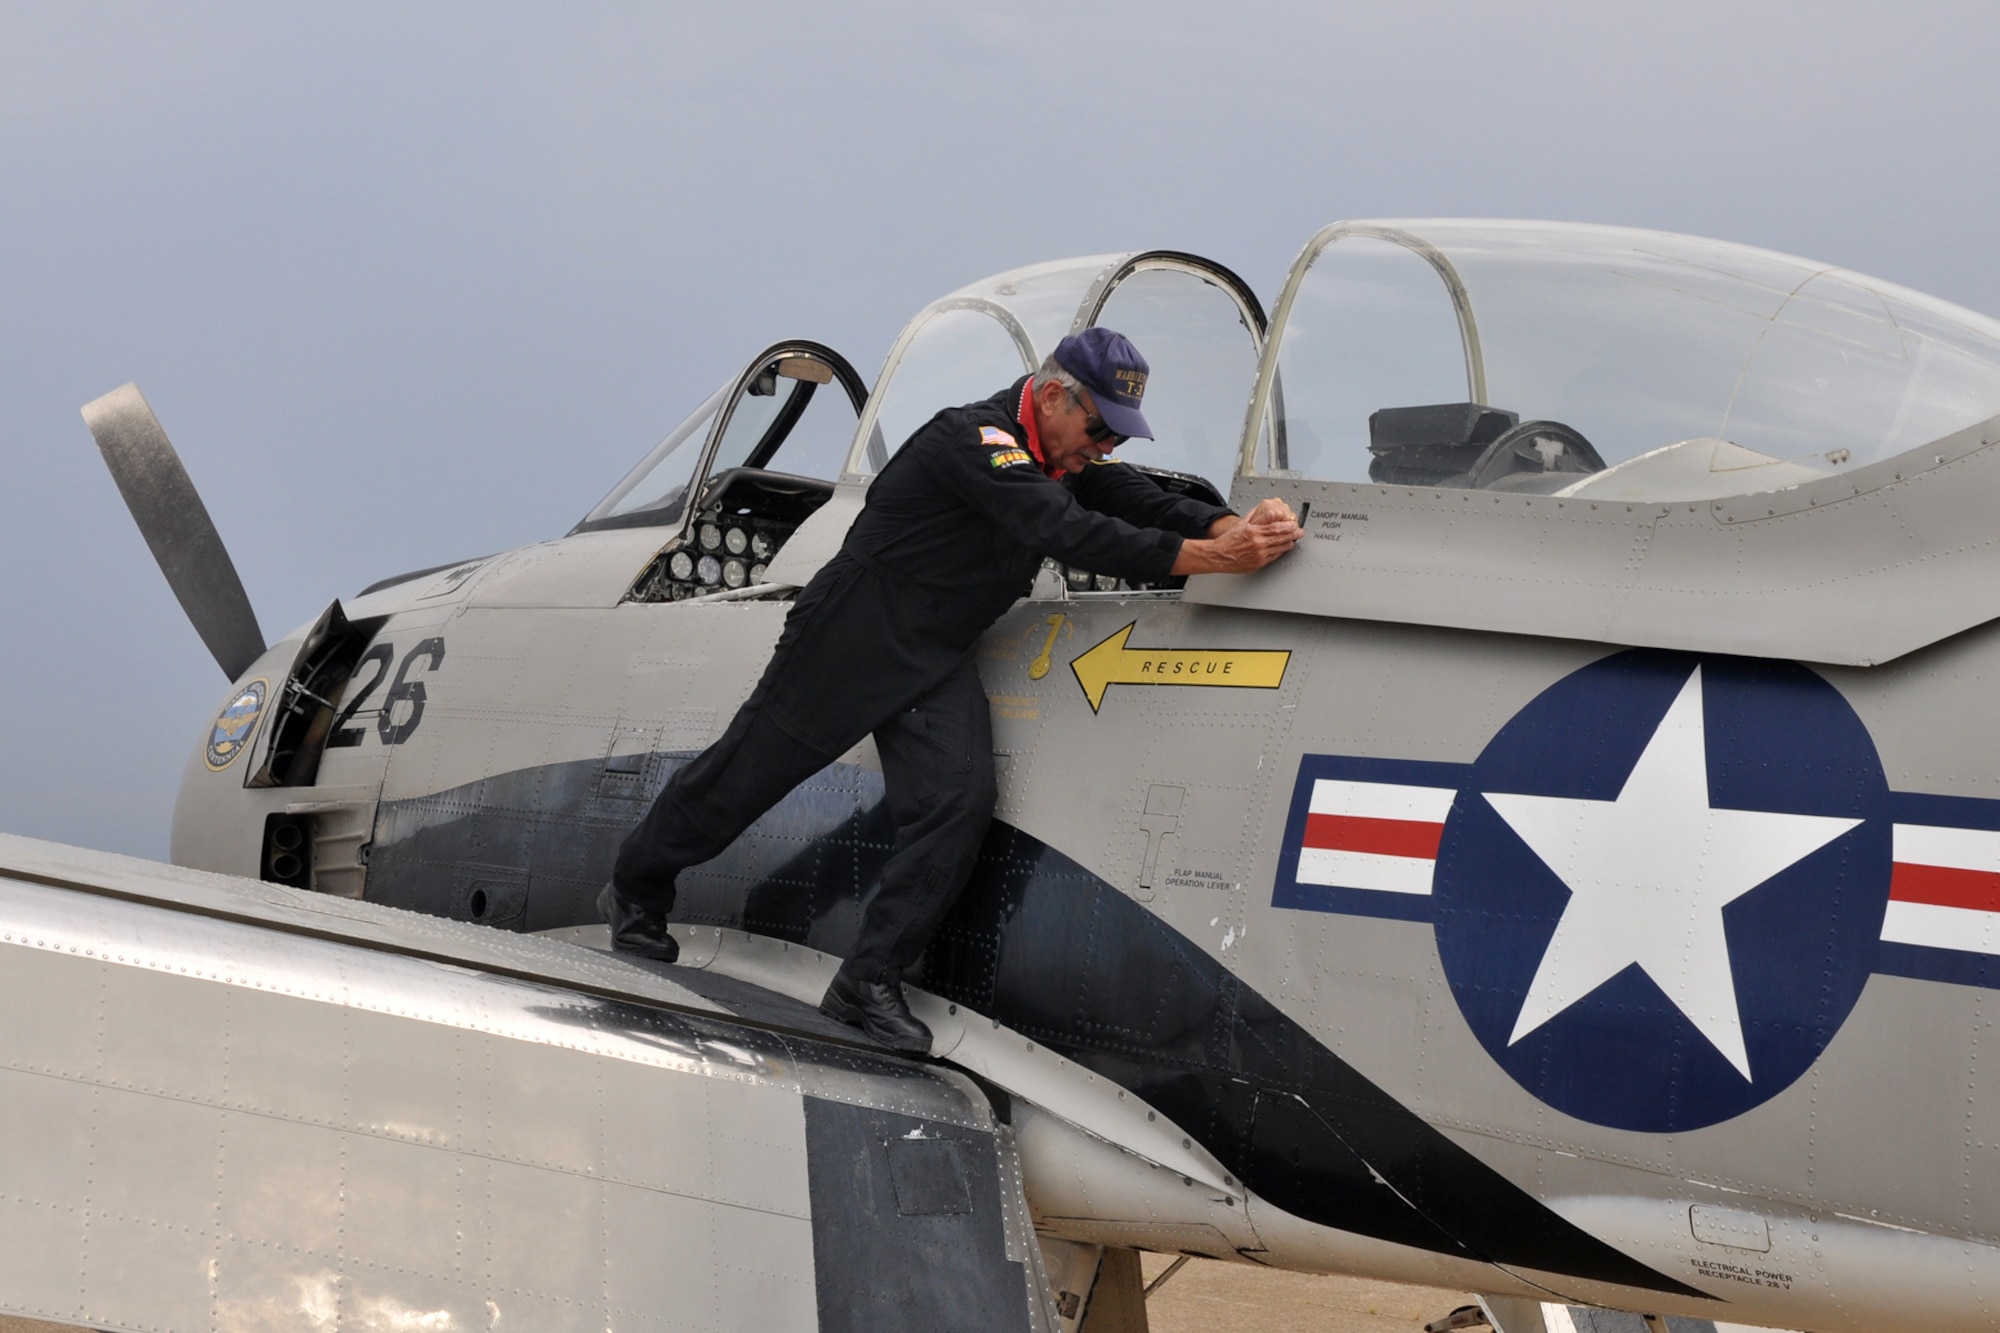 Col. (Ret) John “Slick” Sledge, U.S. Marine Corps, opens the canopy during a pre-flight check before taking off to participate in the Cedar Creek Lake Air Show, “Thunder Over Cedar Creek Lake,” near Mabank, Texas, July 2, 2011. Colonel Sledge launched the North American T-28 Trojan from the Tyler Pounds Regional Airport in Tyler, Texas. He flies with the Trojan Phlyers T-28 Flight Demonstration Team from Fort Worth, Texas. Colonel Sledge was also one of the featured performers at the “Wings Over Tyler Air Show” at the Tyler Pounds Regional Airport, July 3, 2011. (U.S. Air Force photo/Tech. Sgt. Jeff Walston) 